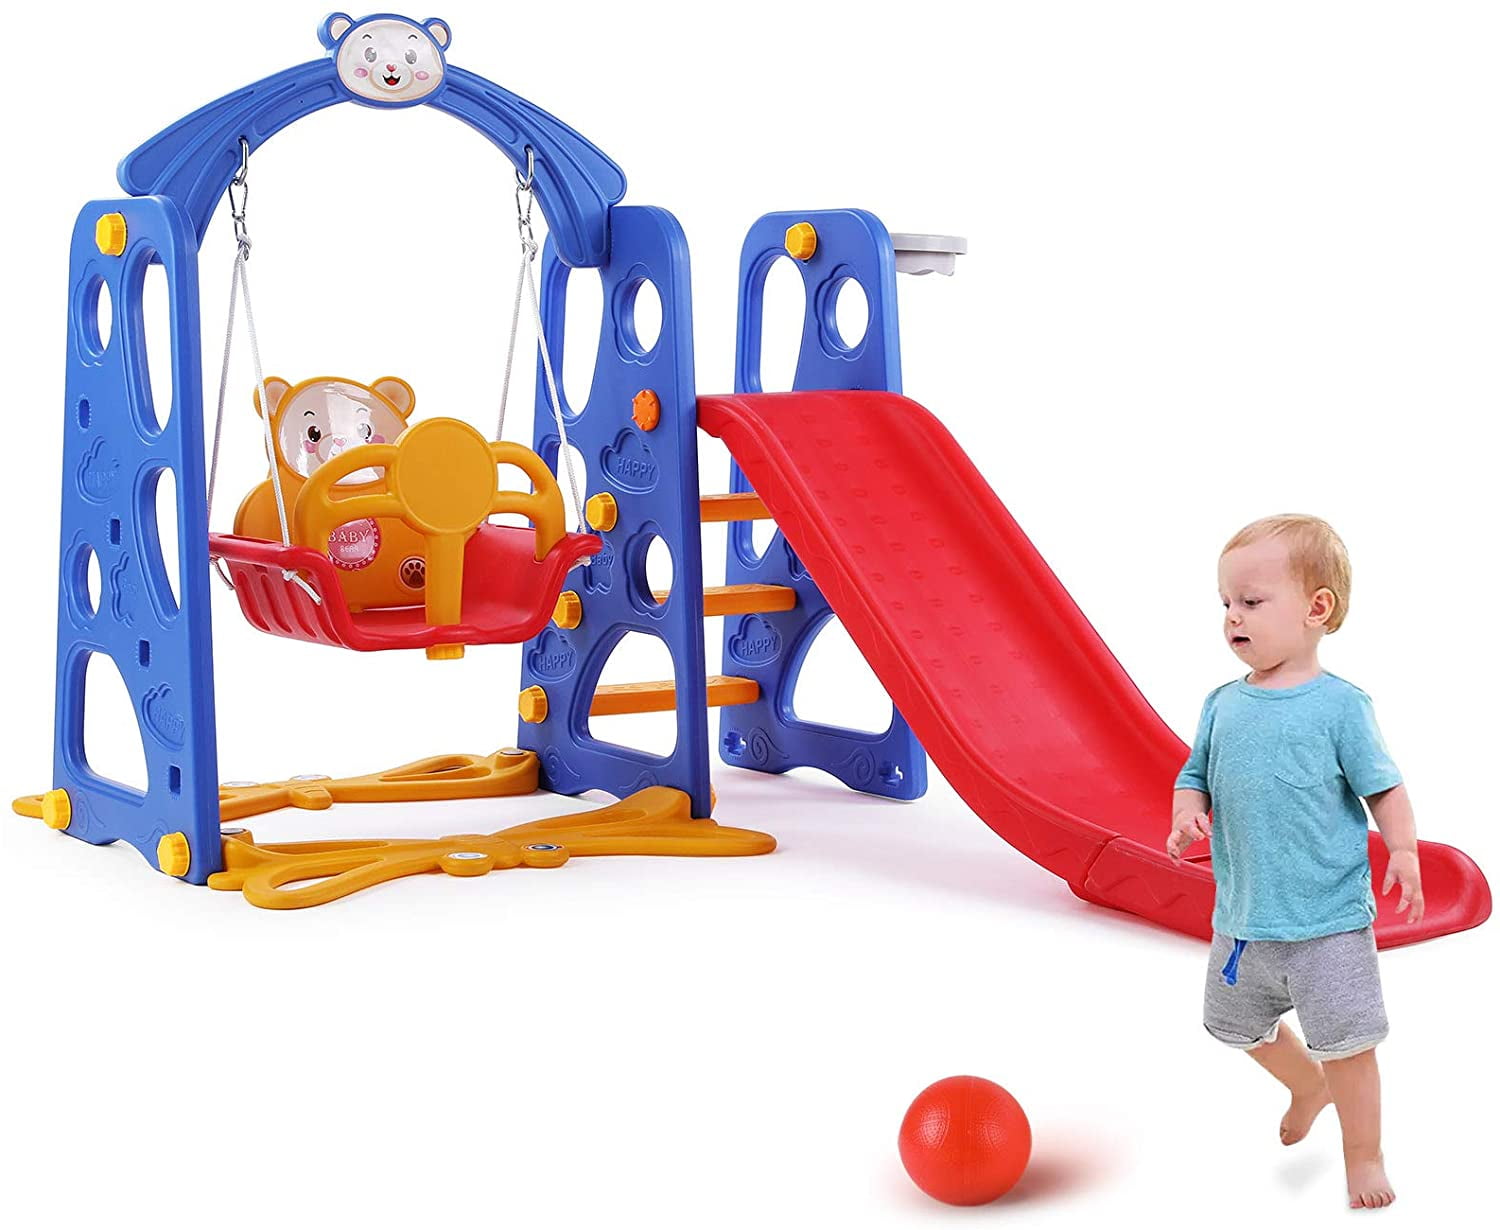 Toddler Climber Slide Play Swing Set Kids Indoor Outdoor Playground Play Toy set 